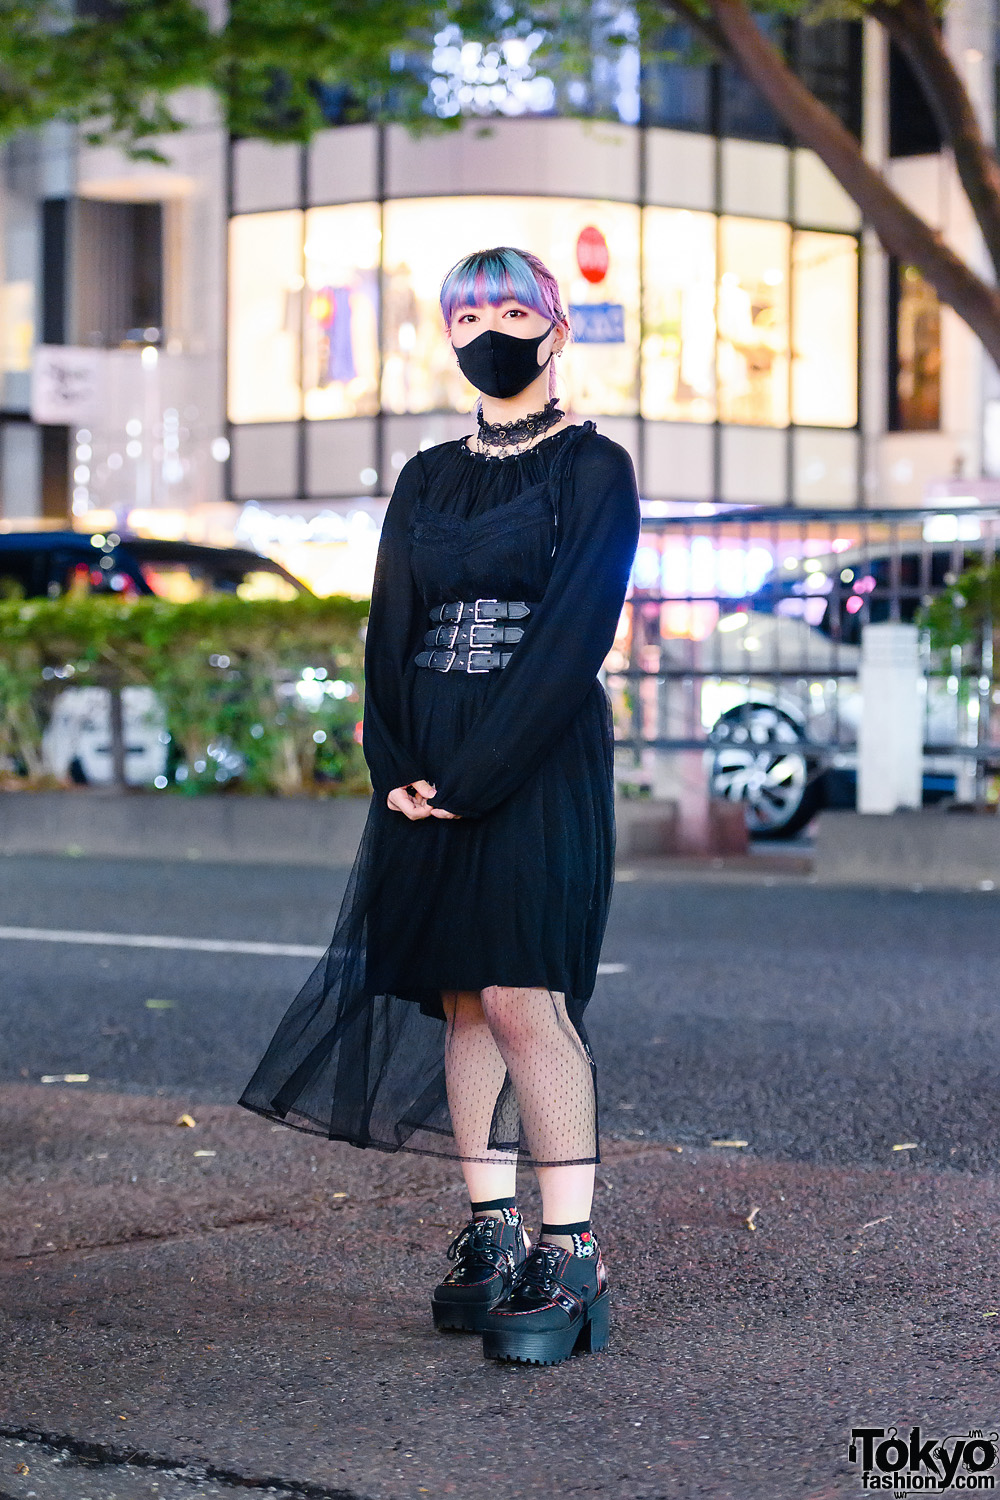 All Black Tokyo Style w/ Unicorn Ponytail, Lace Choker, Sheer Lingerie Dress Over Gypsy Dress, Corset Belt, Coach, OZZ, Mishka Backpack & Ankle Boots